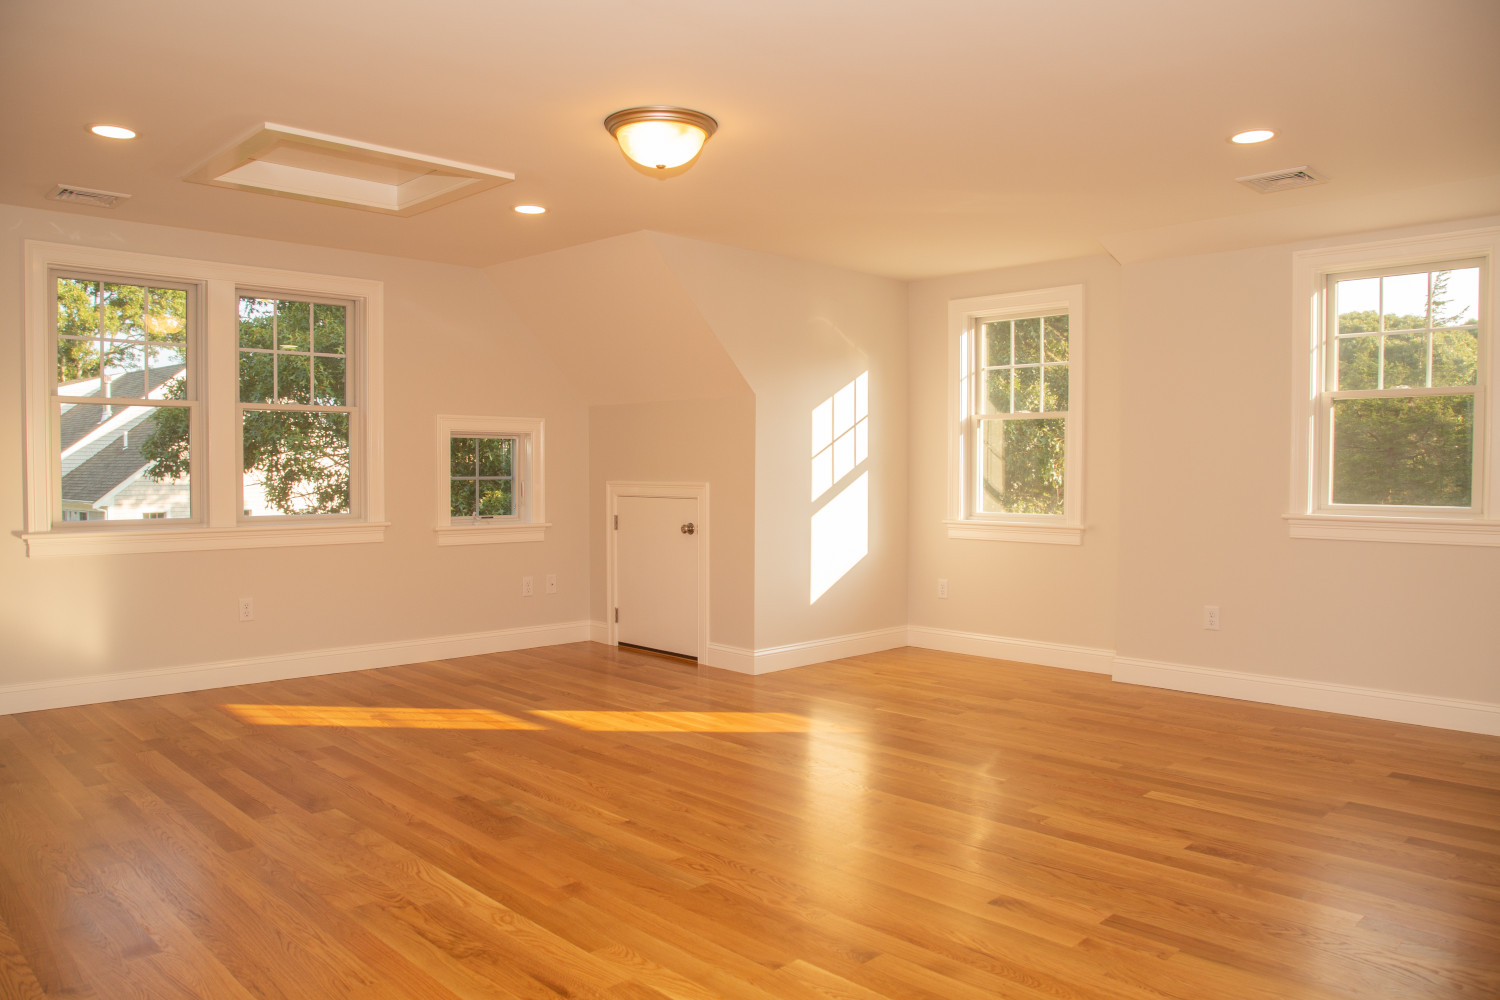 Large room with wood floor